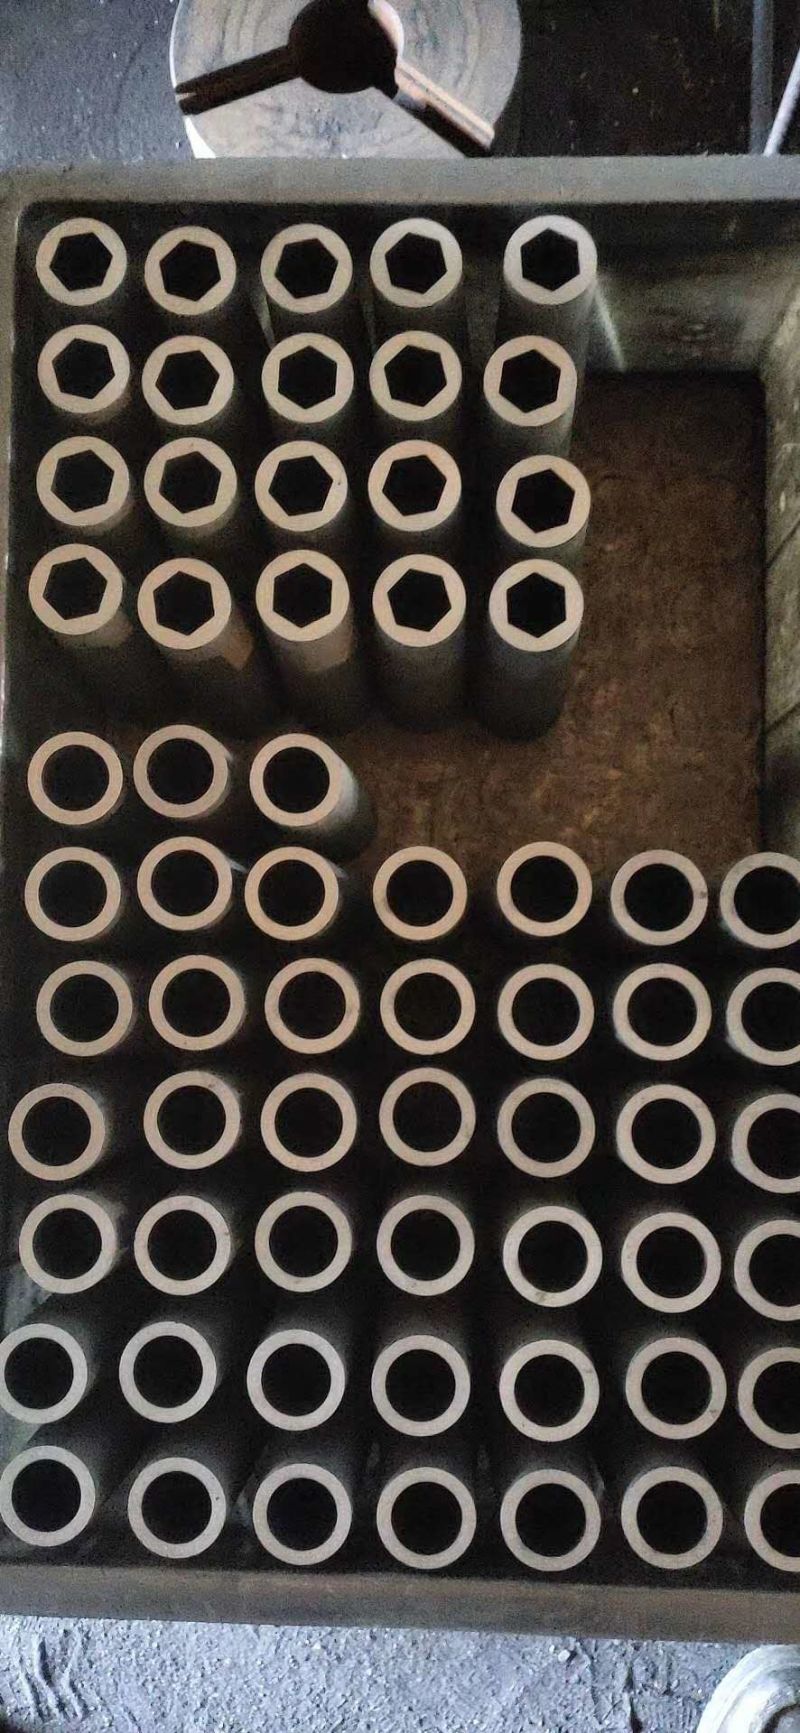 Professional Manufacturer of Graphite Mold for Bronze Produsing